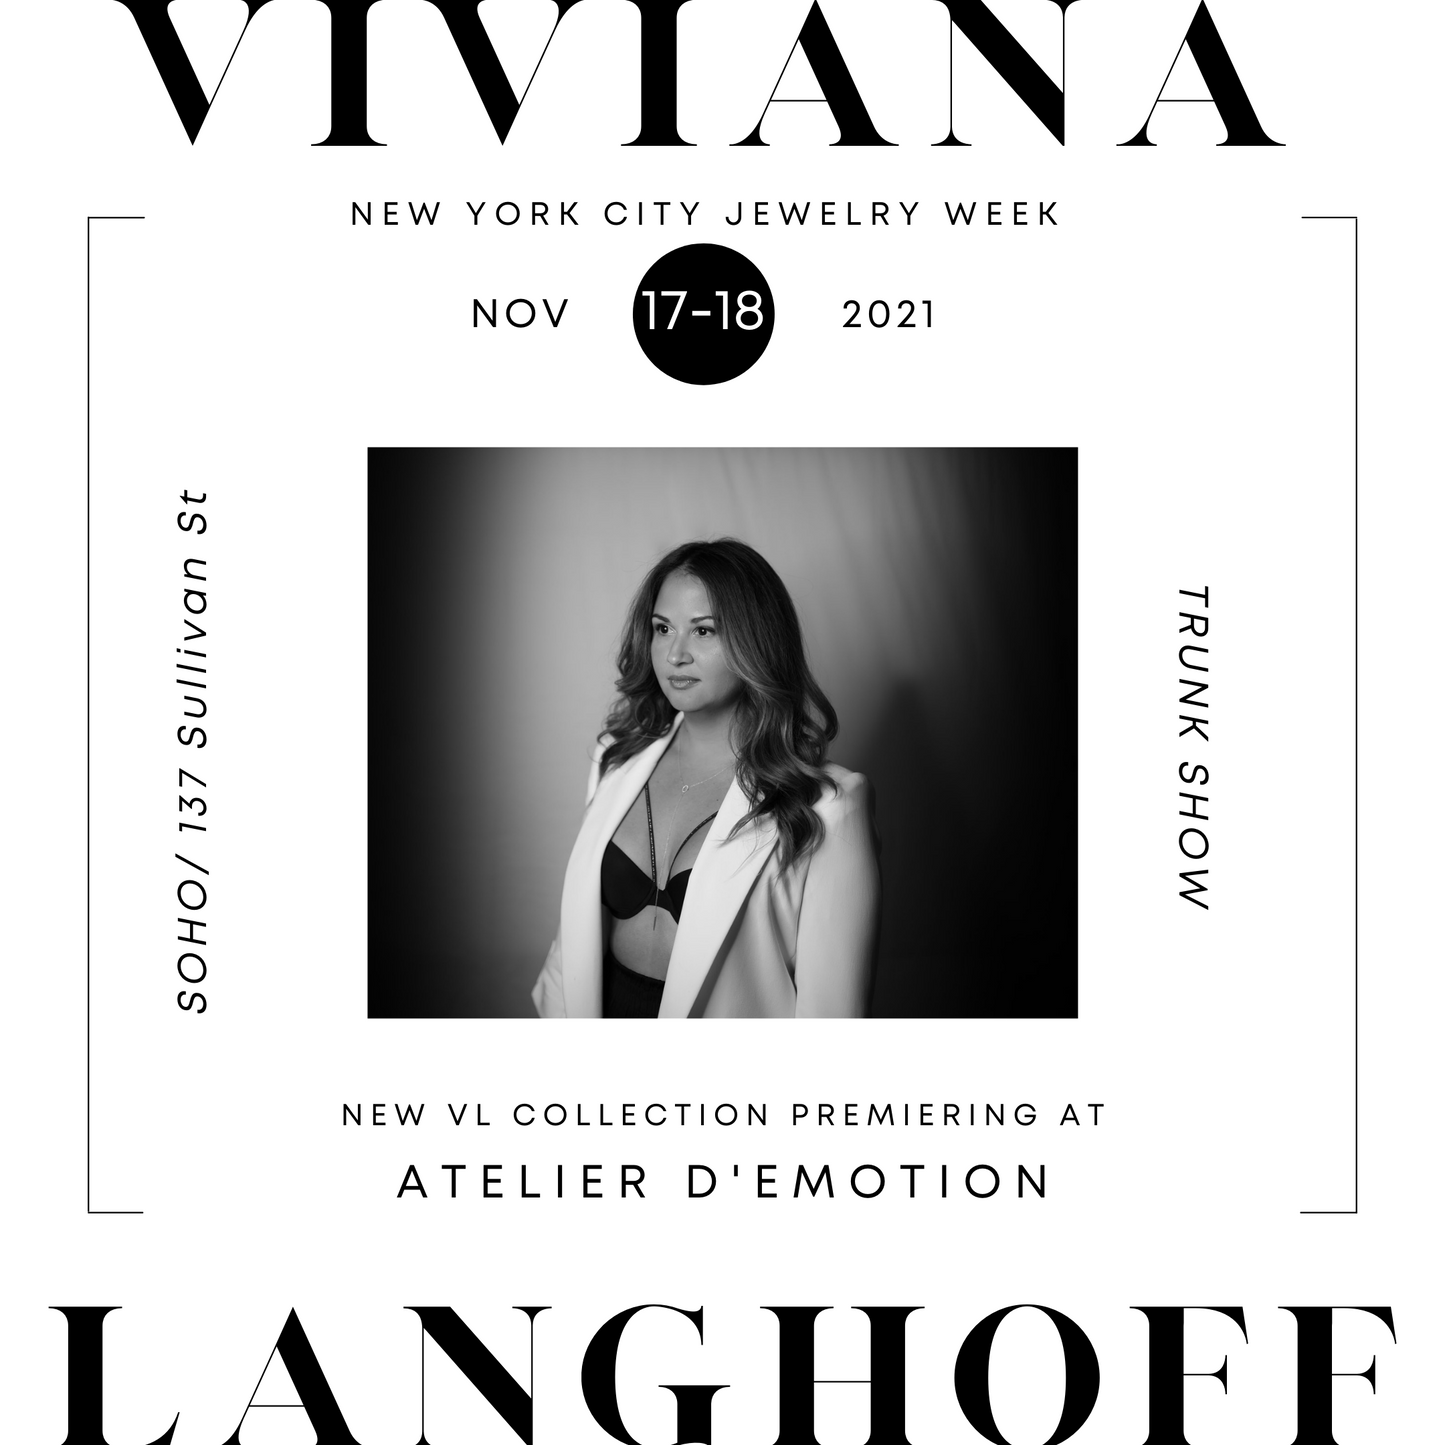 Viviana Langhoff Trunk Show at Atelier D'Emotion // NYCJW